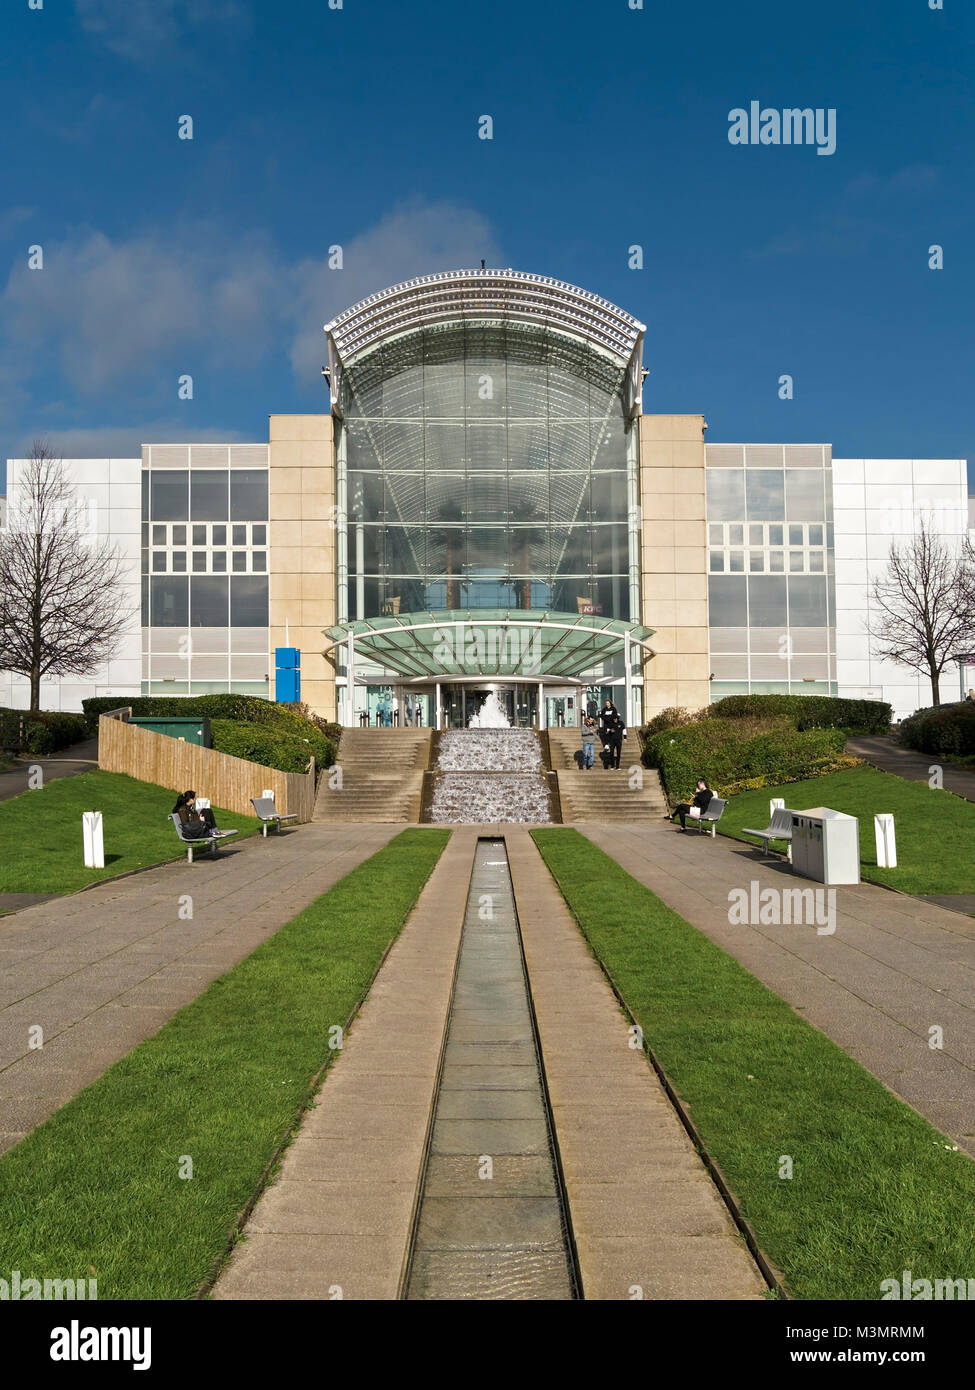 The main shopping centre entrance and atrium of The Mall at Cribbs Causeway, Bristol, England, UK Stock Photo